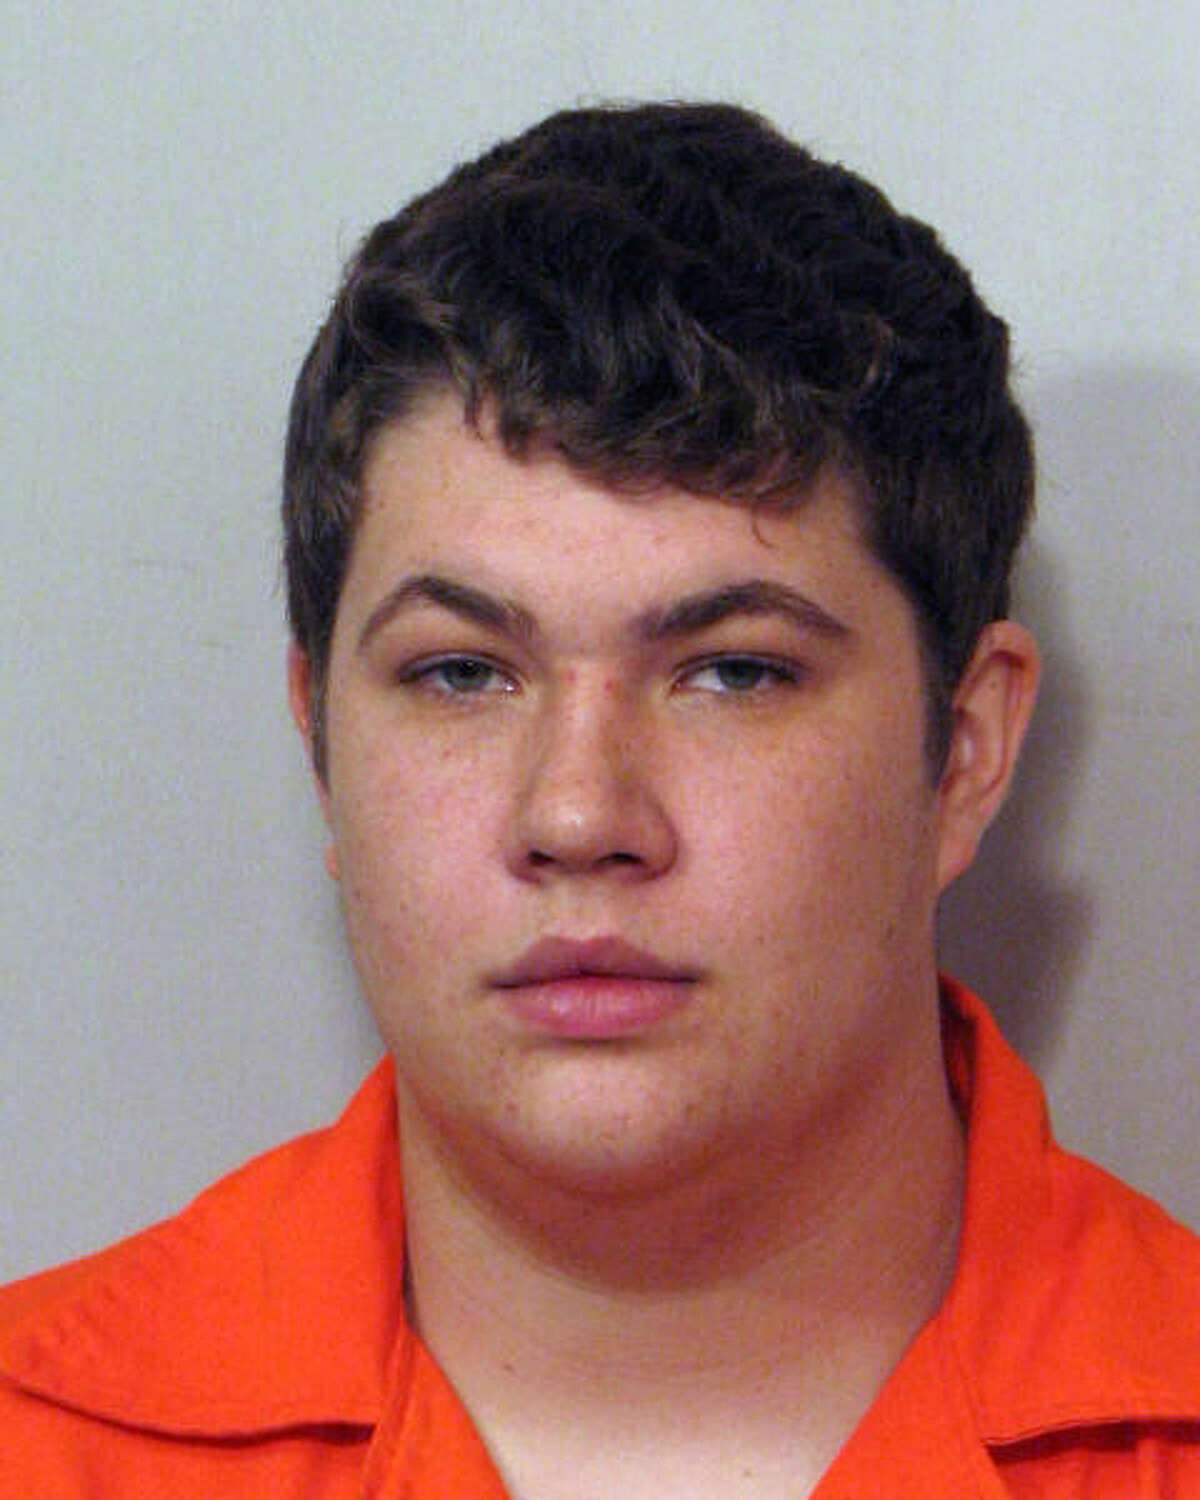 Conner Hinton, 17, of Sugar Land, has been charged with burglary in connection with a Feb. 8 break-in at the home of Sugar Land Police Chief Doug Brinkley.